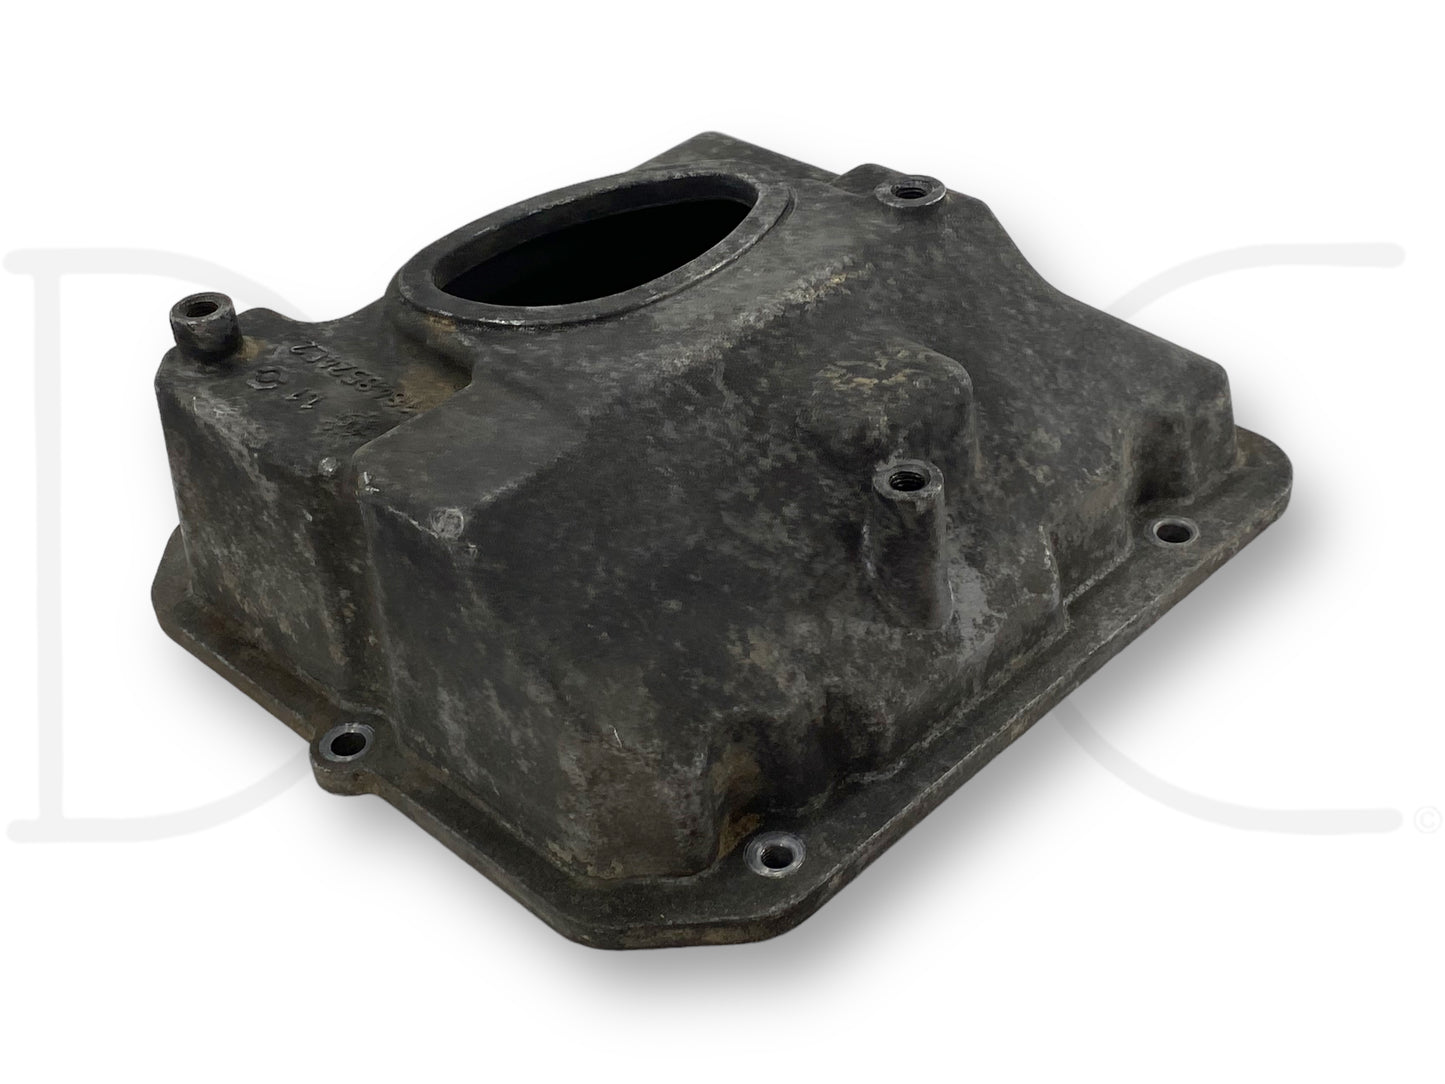 08-10 Ford F250 6.4 6.4L Hpfp High Pressure Fuel Injection Pump Cover 1848524C2